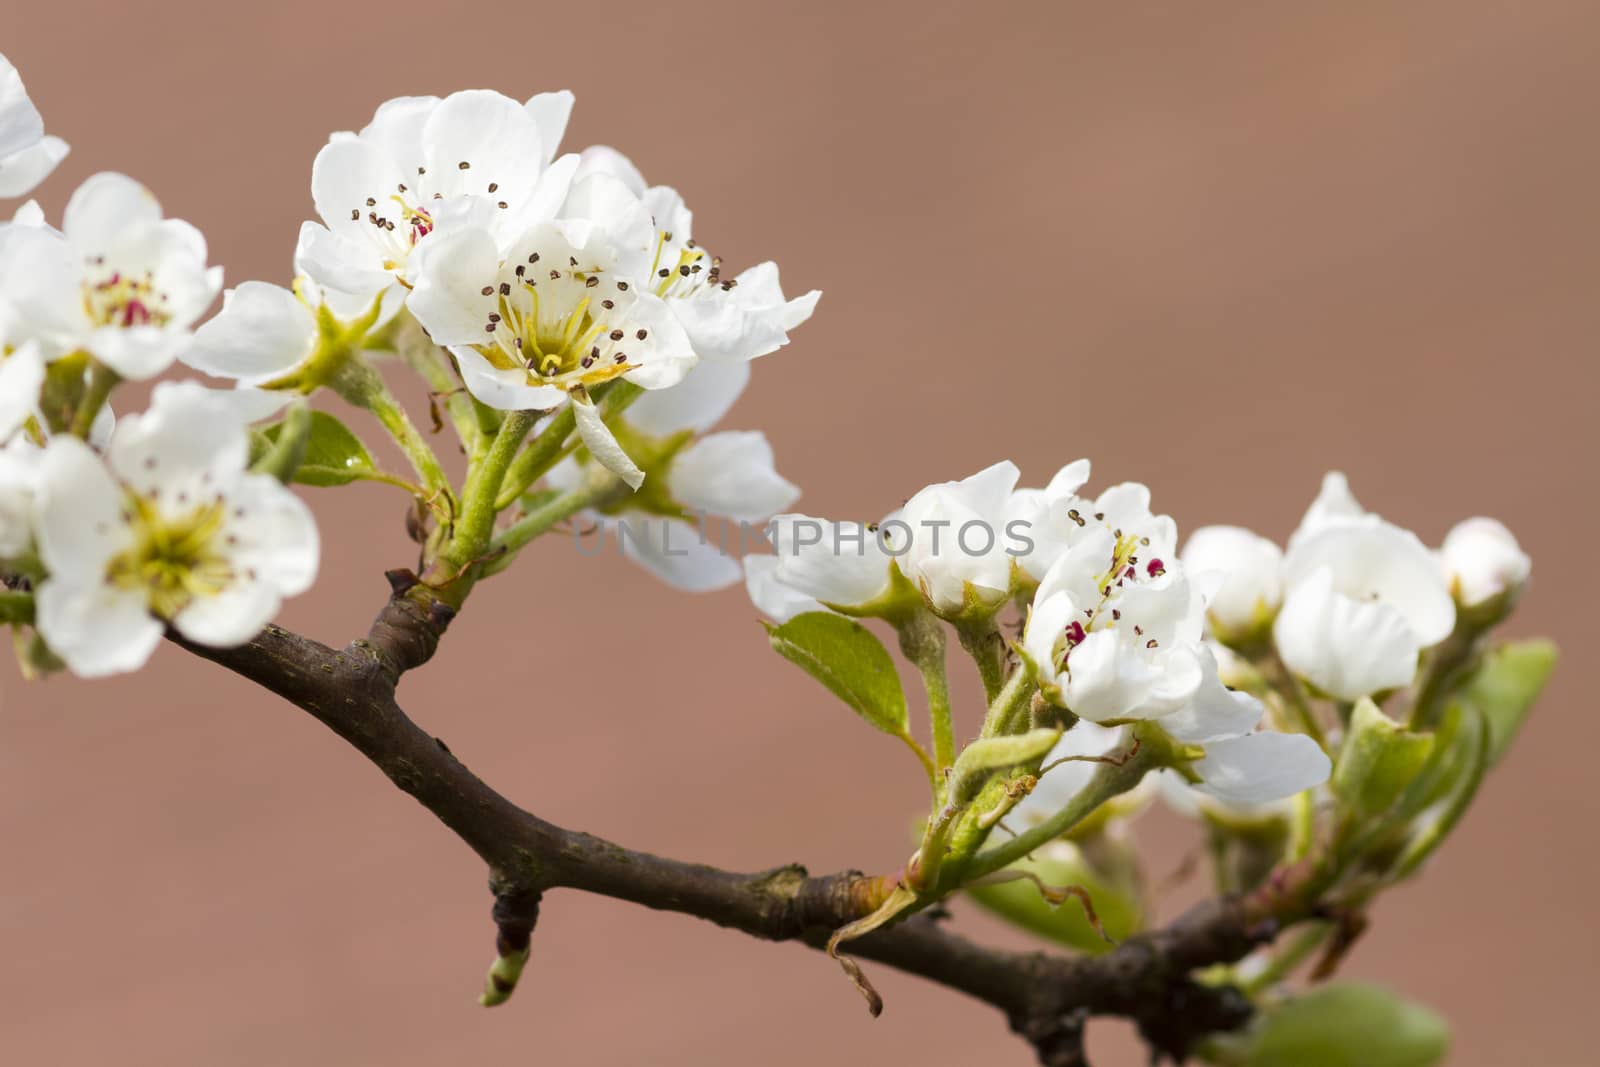 Pear Blossom closeup on a brown background